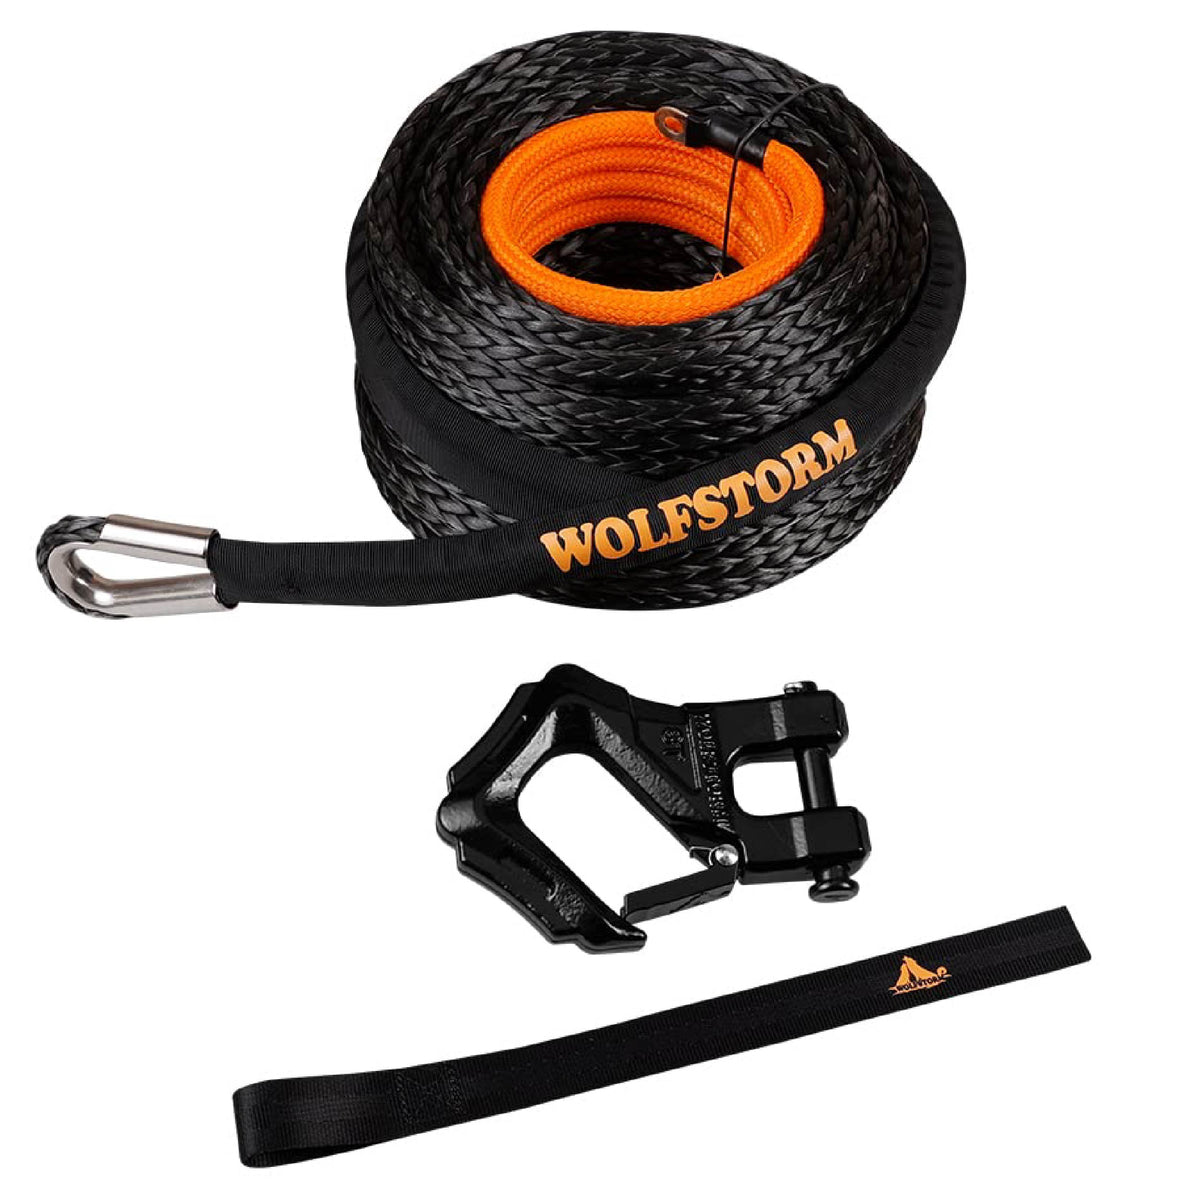 Wholesale Winch Ropes from Manufacturers, Winch Ropes Products at Factory  Prices